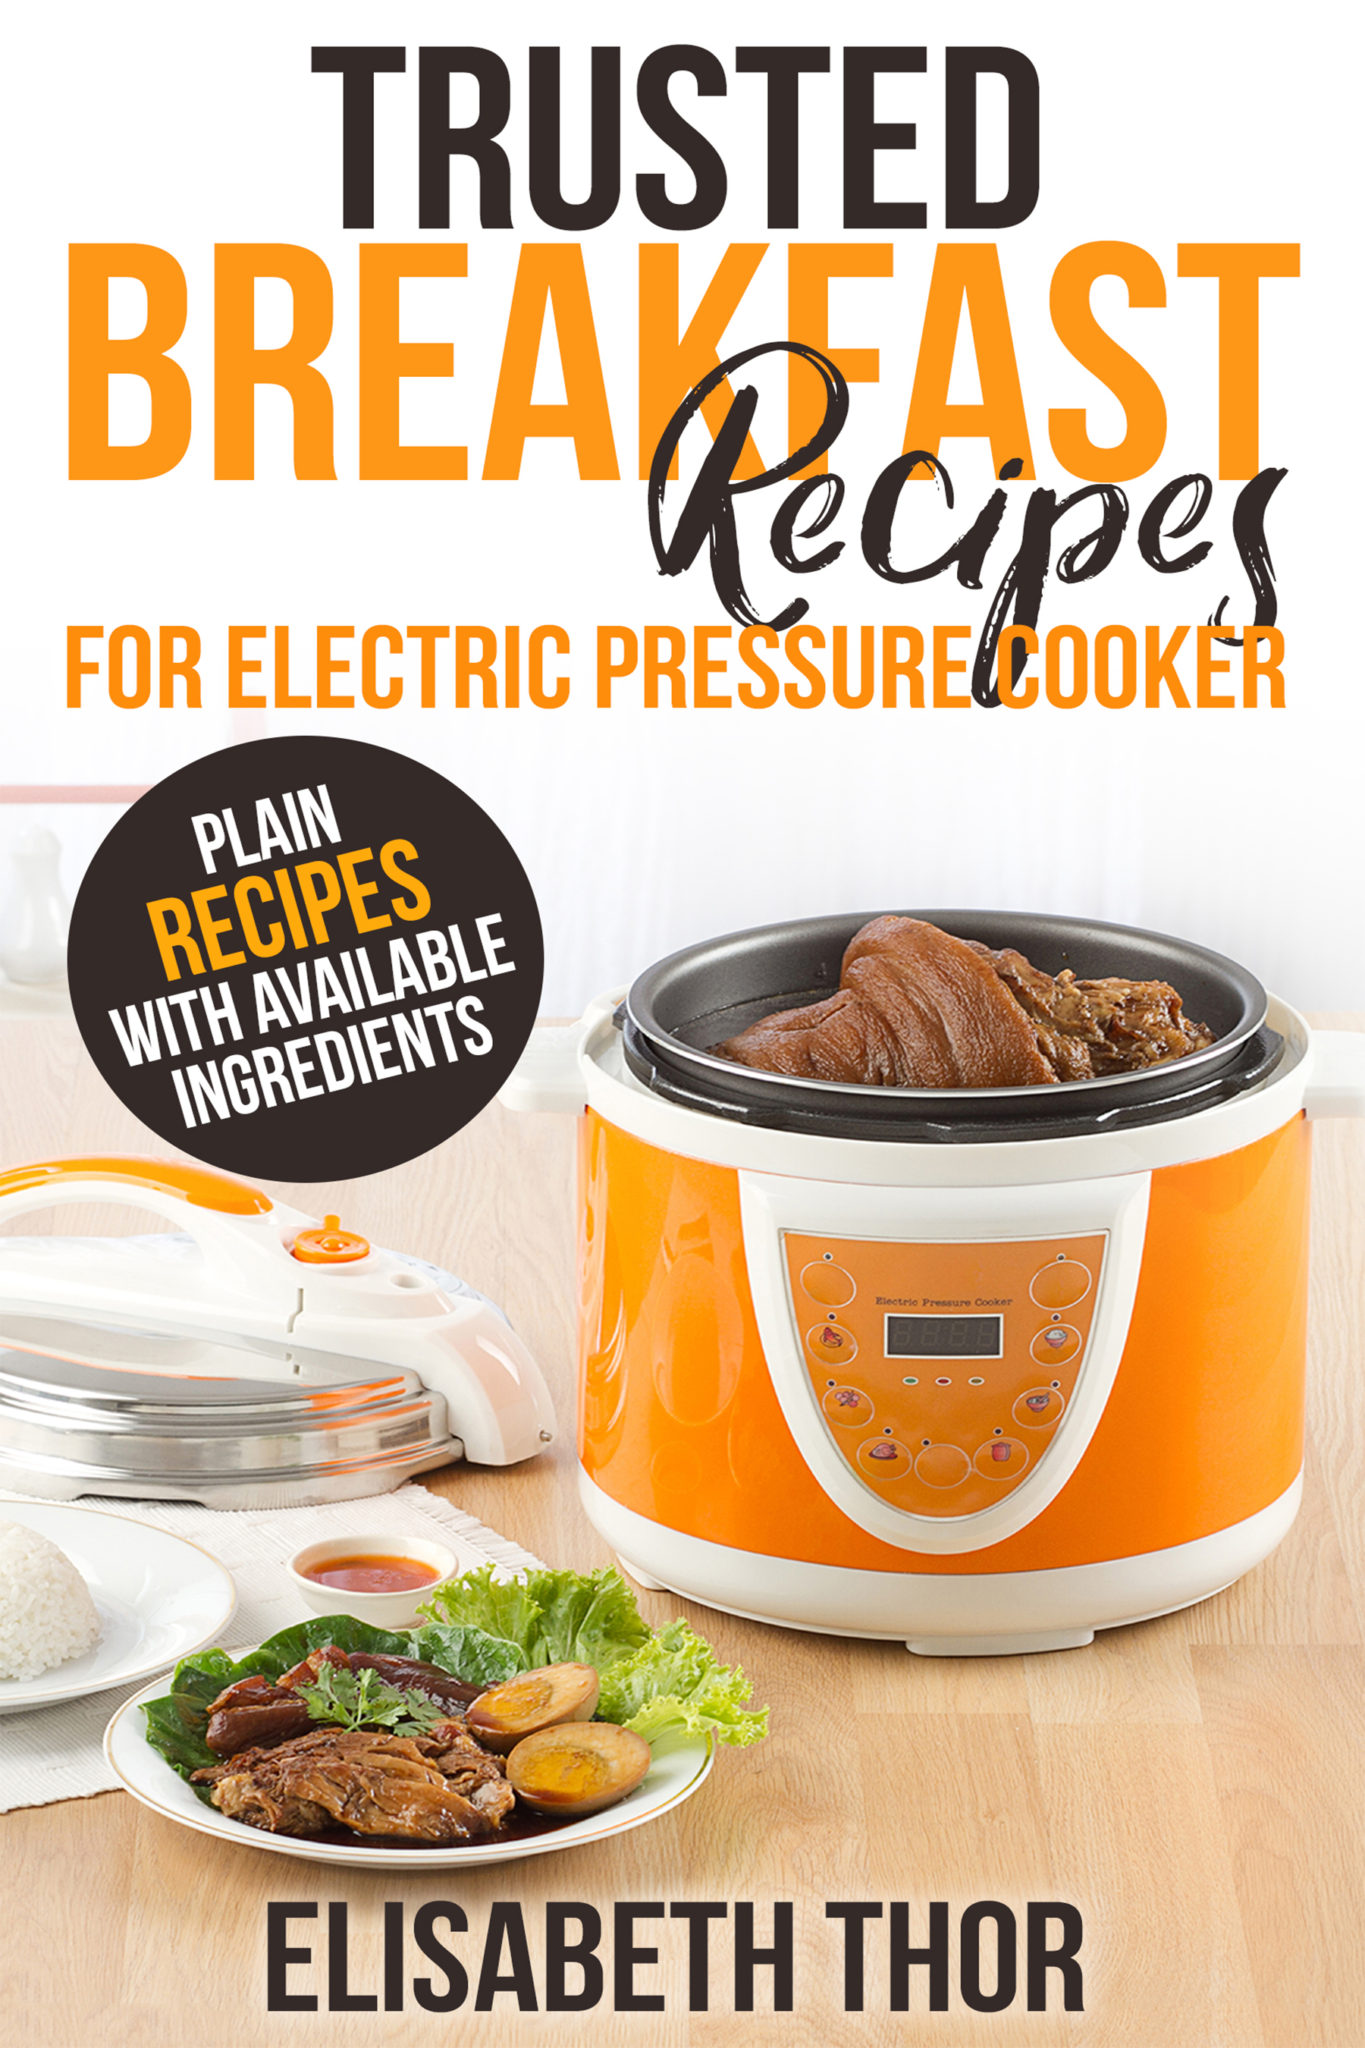 FREE: Trusted Breakfast Recipes for Electric Pressure Cooker: 31 Plain Recipes With Available Ingredient by Elisabeth Thor